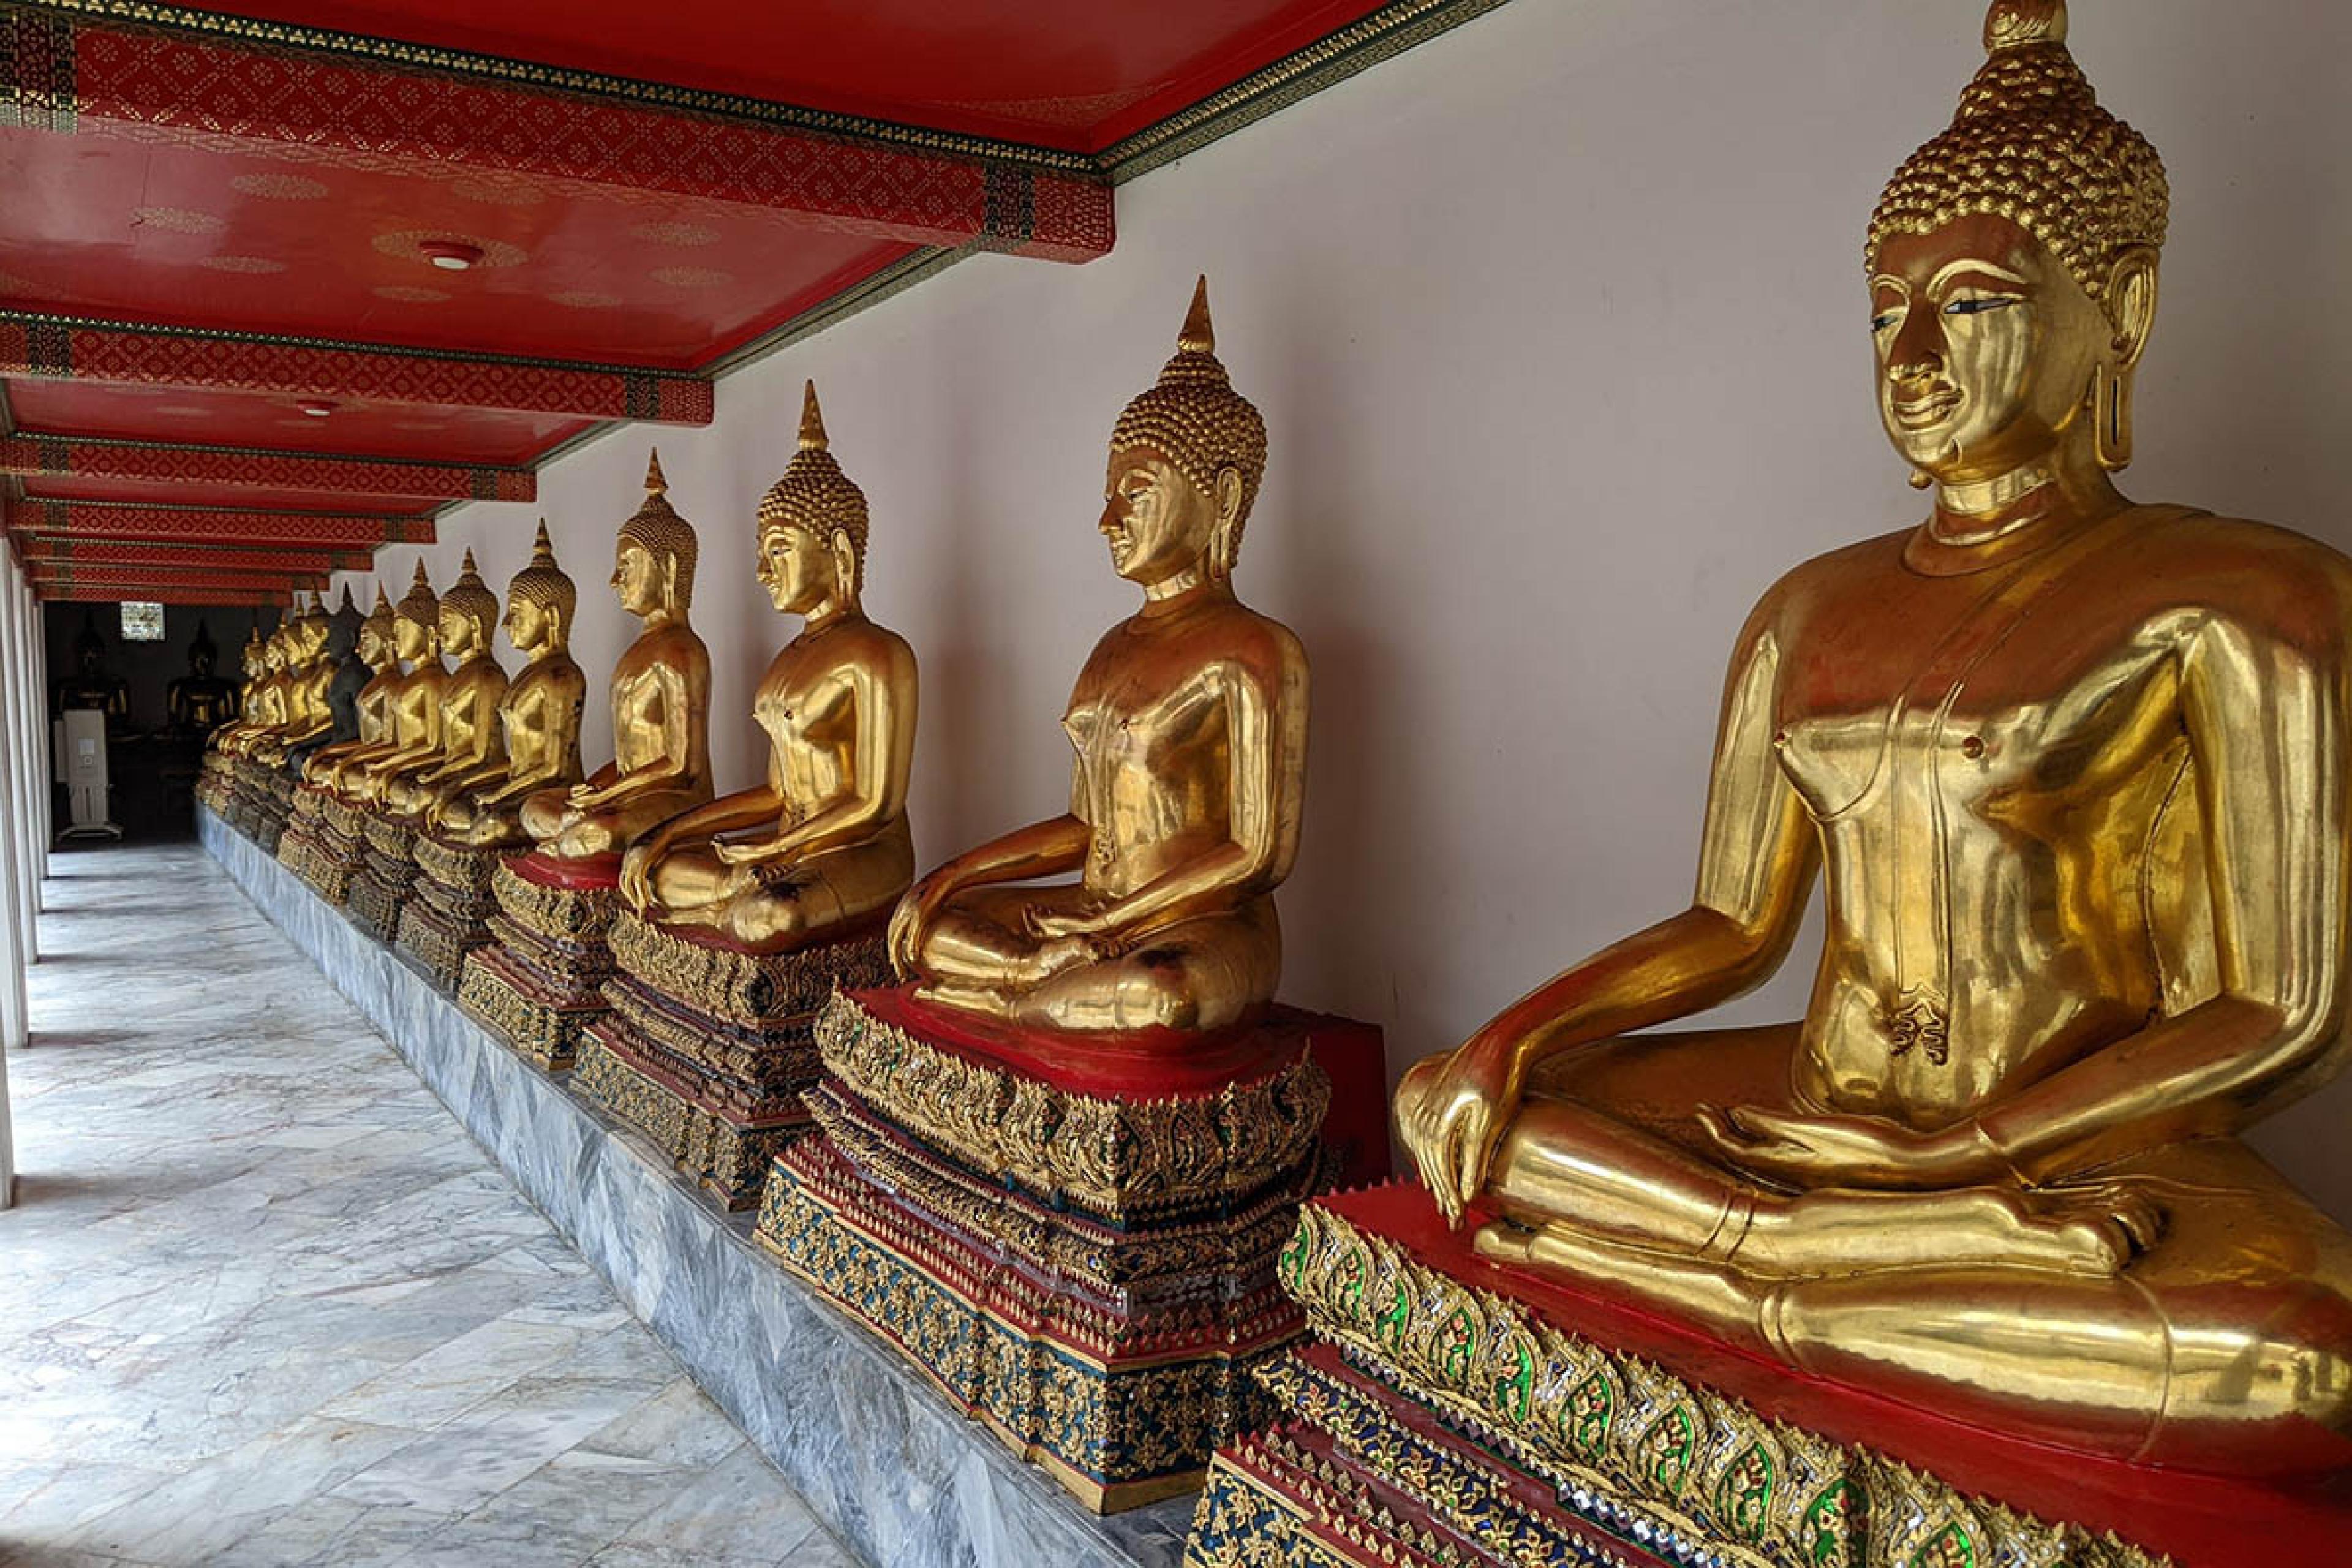 gold buddha statues lined up against a temple wall in Bangkok